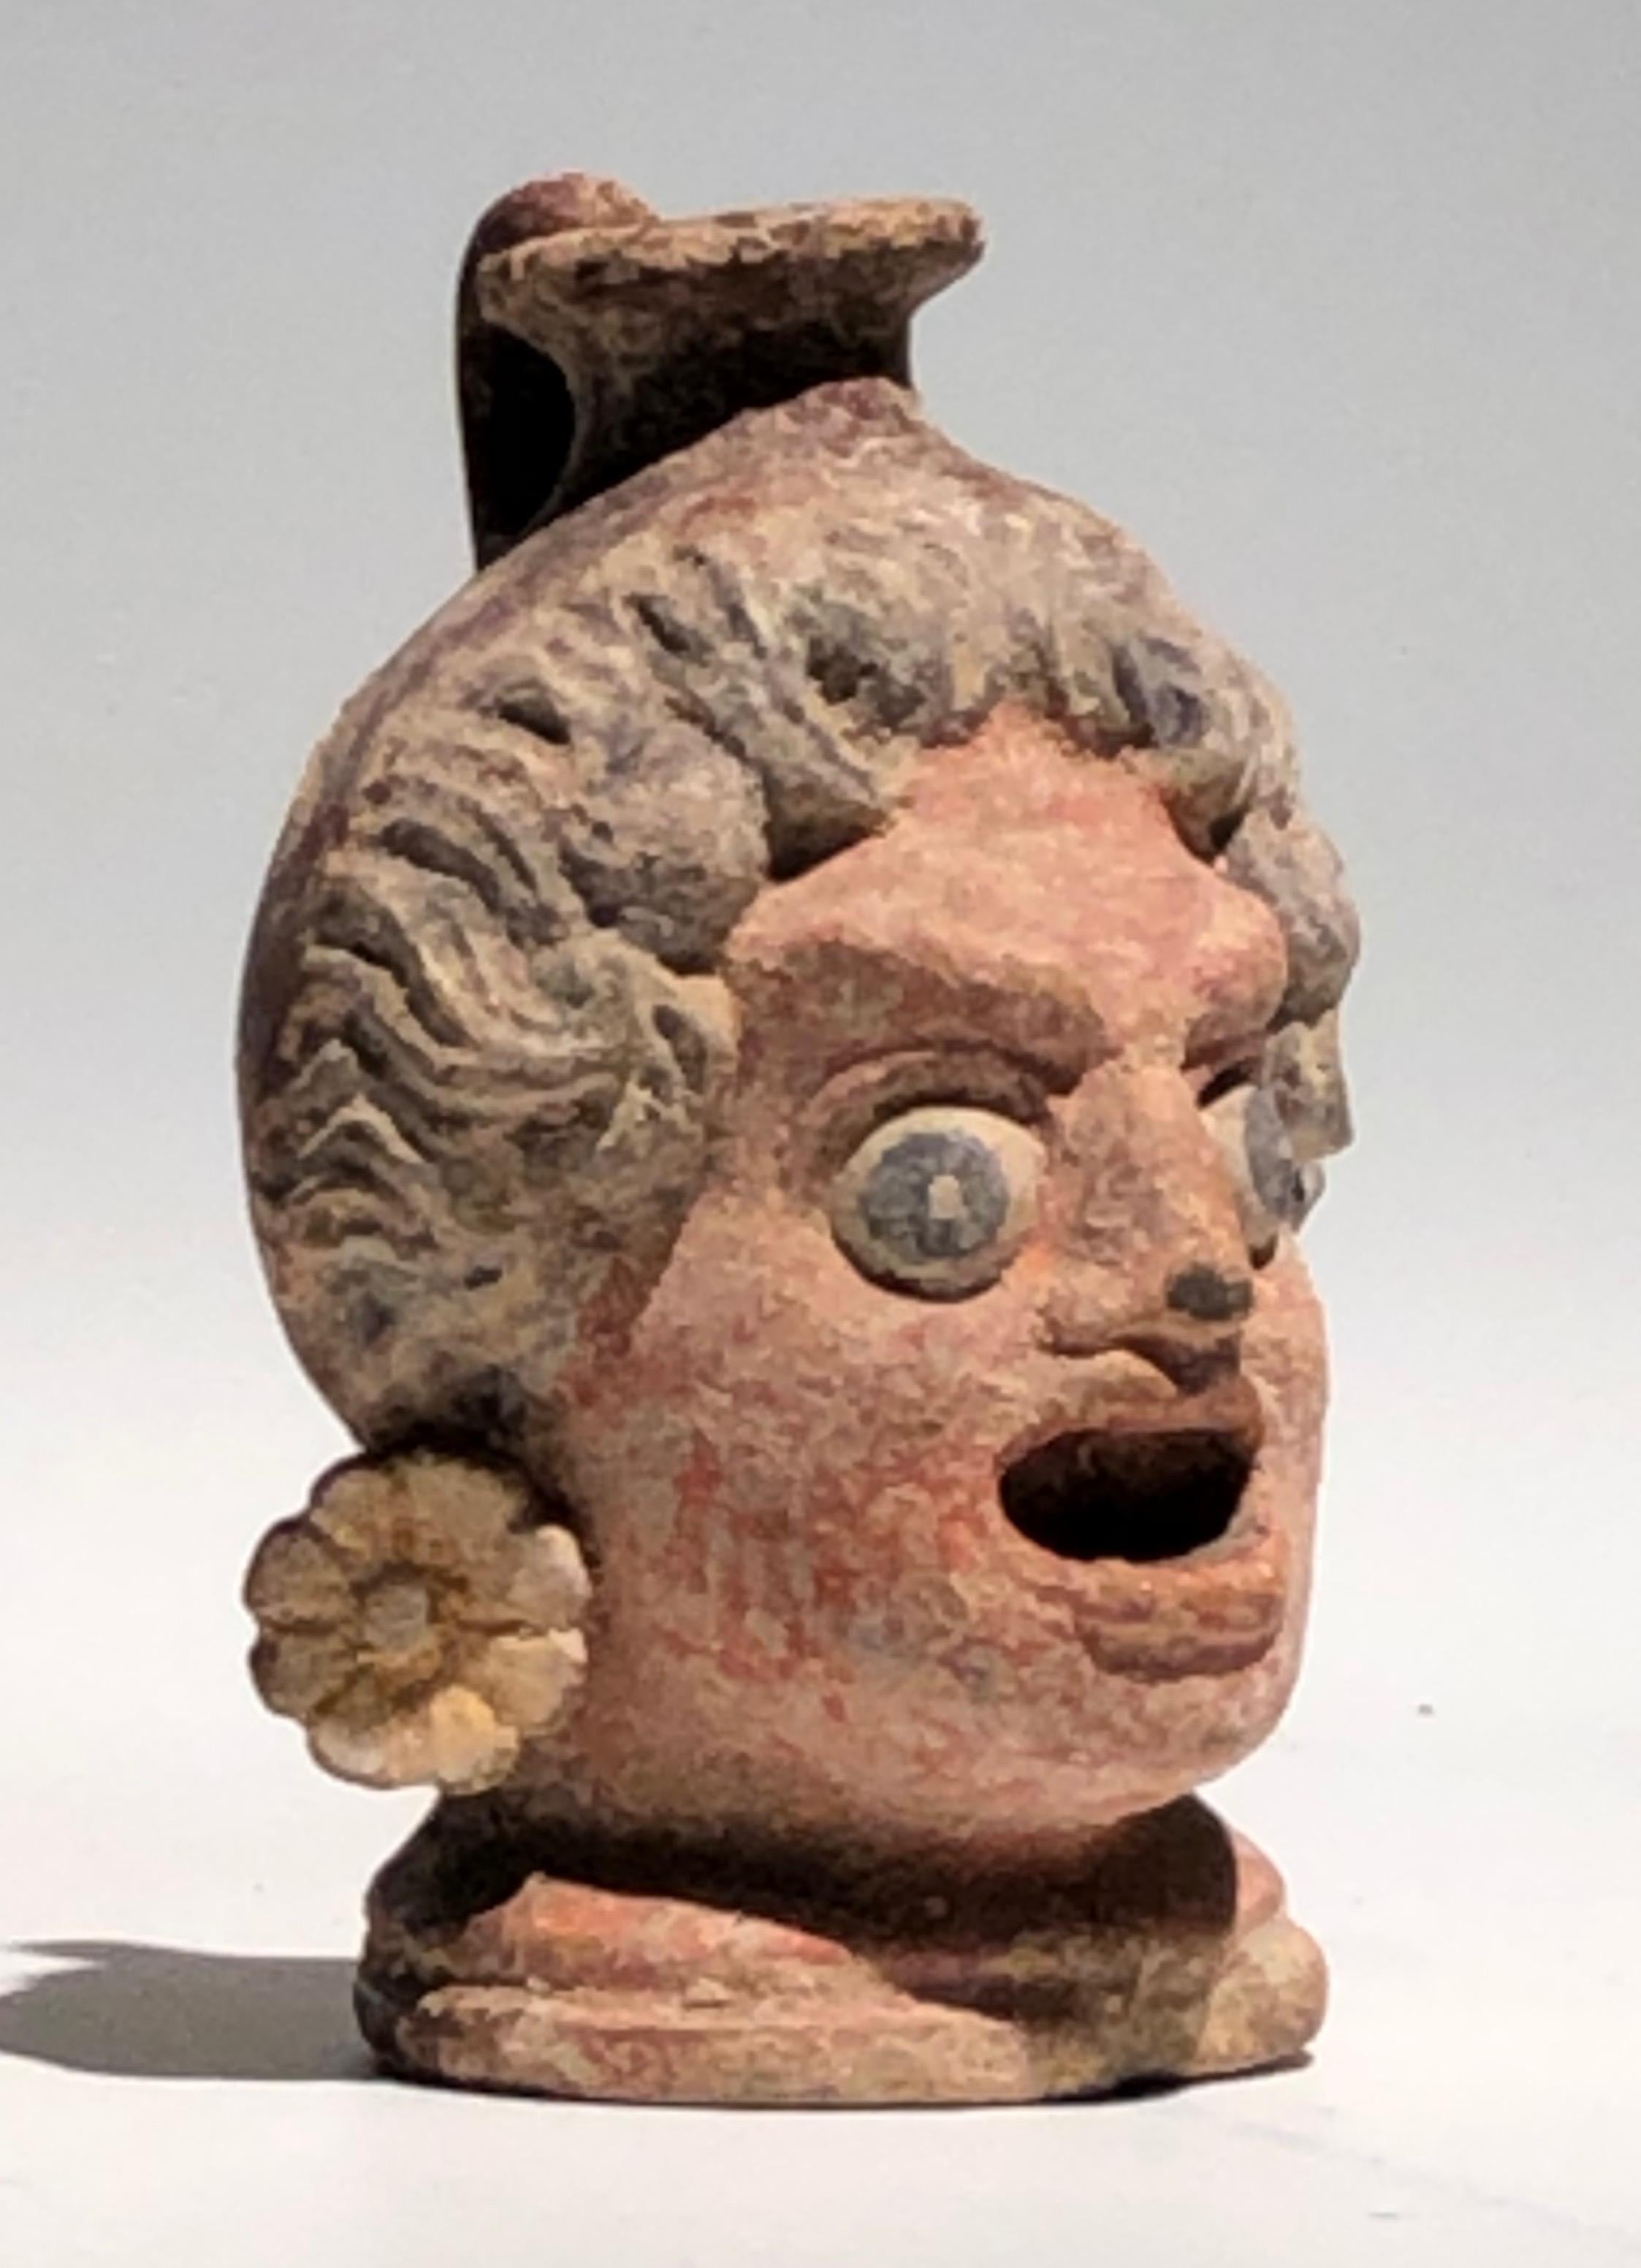 Western Greek polychrome head vase of an actor with a face of a dramatic theatre mask, wearing gilded earrings, circa 4th century BC.
The vase, actually a miniature lekythos with a handle at the back of the head, would have contained aetheric oils